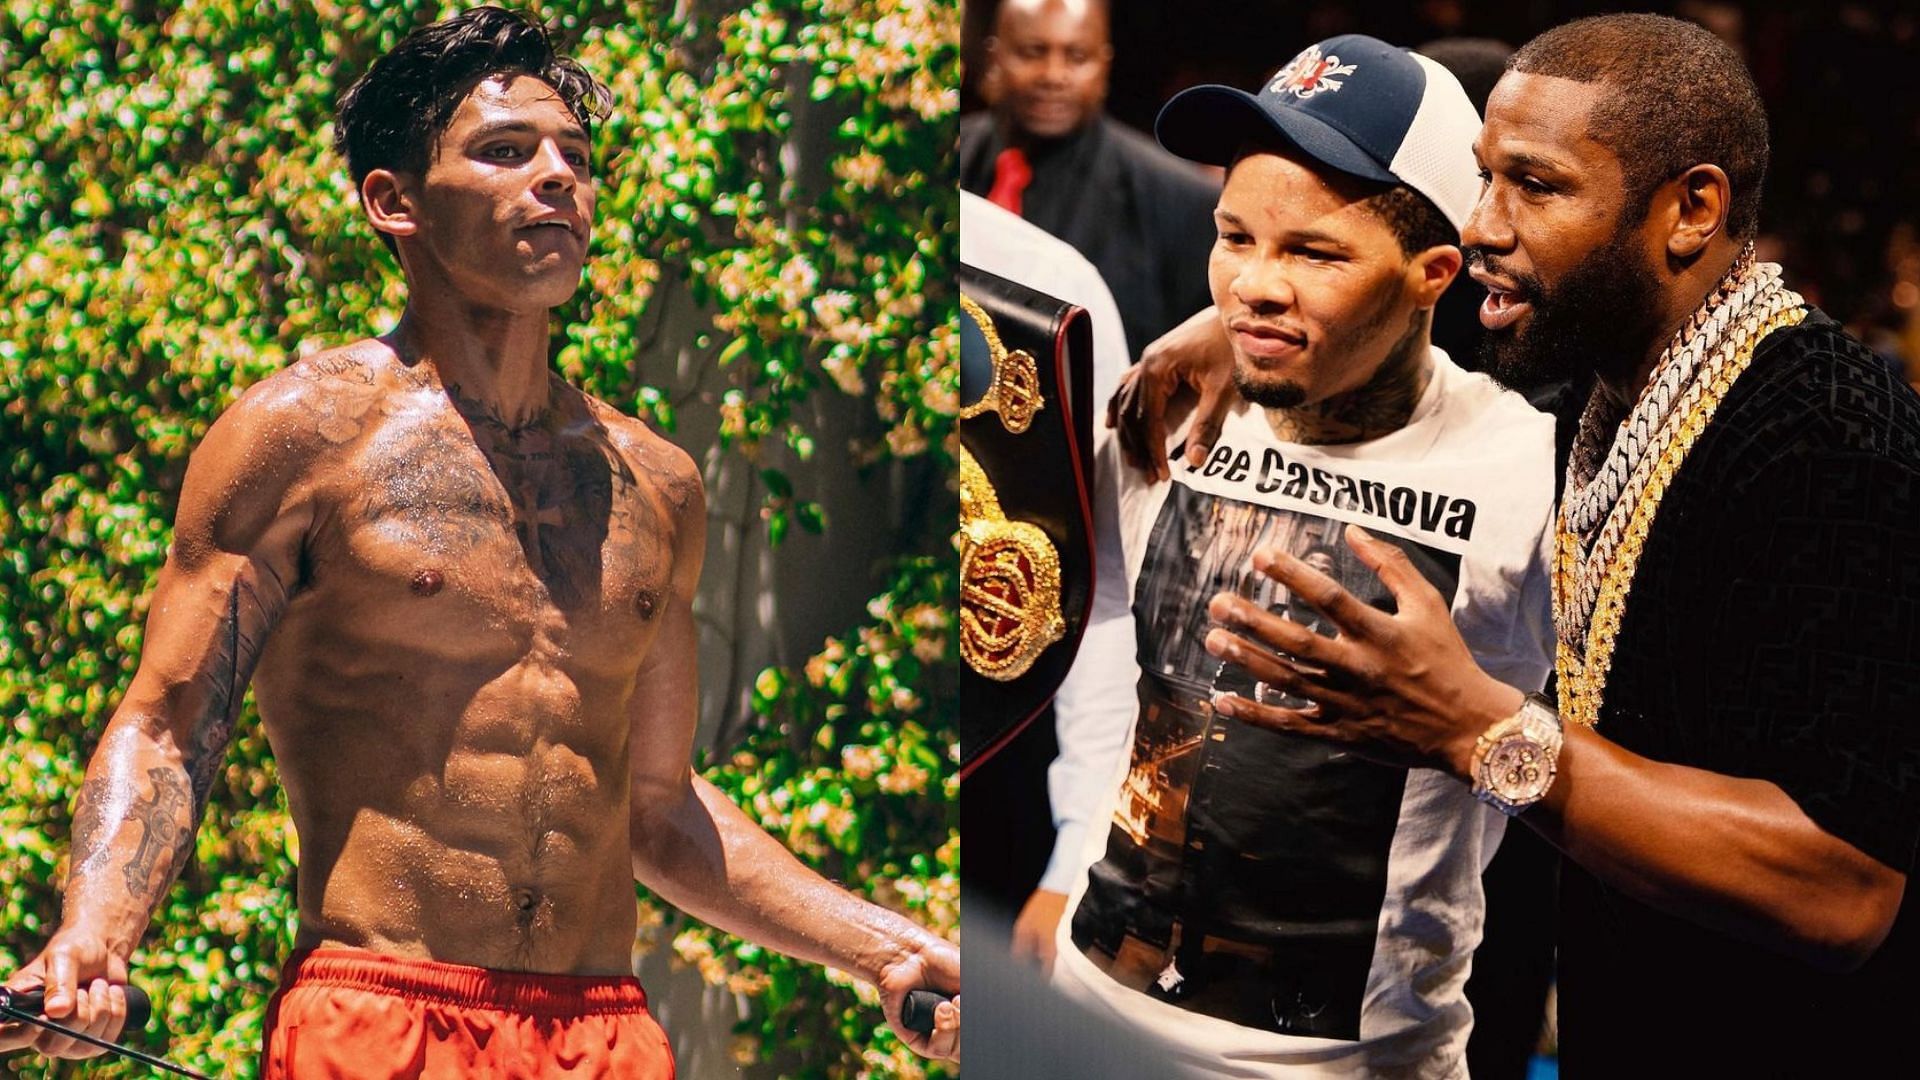 From left to right: Ryan Garcia, Gervonta Davis, and Floyd Mayweather [Images Credits: @kingryan and @gervontaa on Instagram]